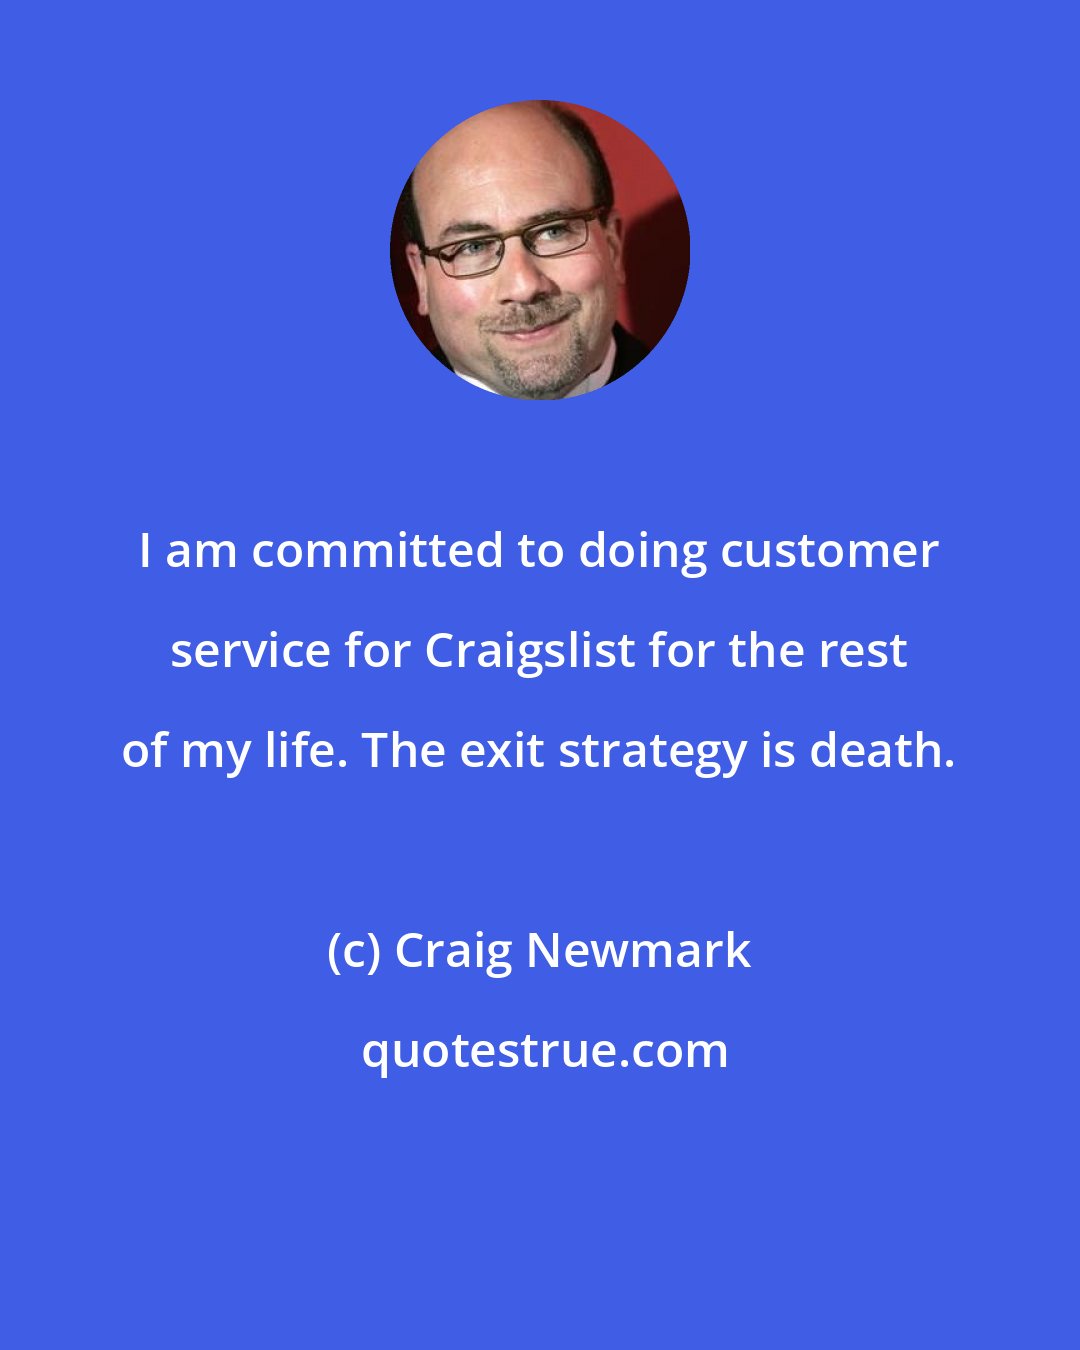 Craig Newmark: I am committed to doing customer service for Craigslist for the rest of my life. The exit strategy is death.